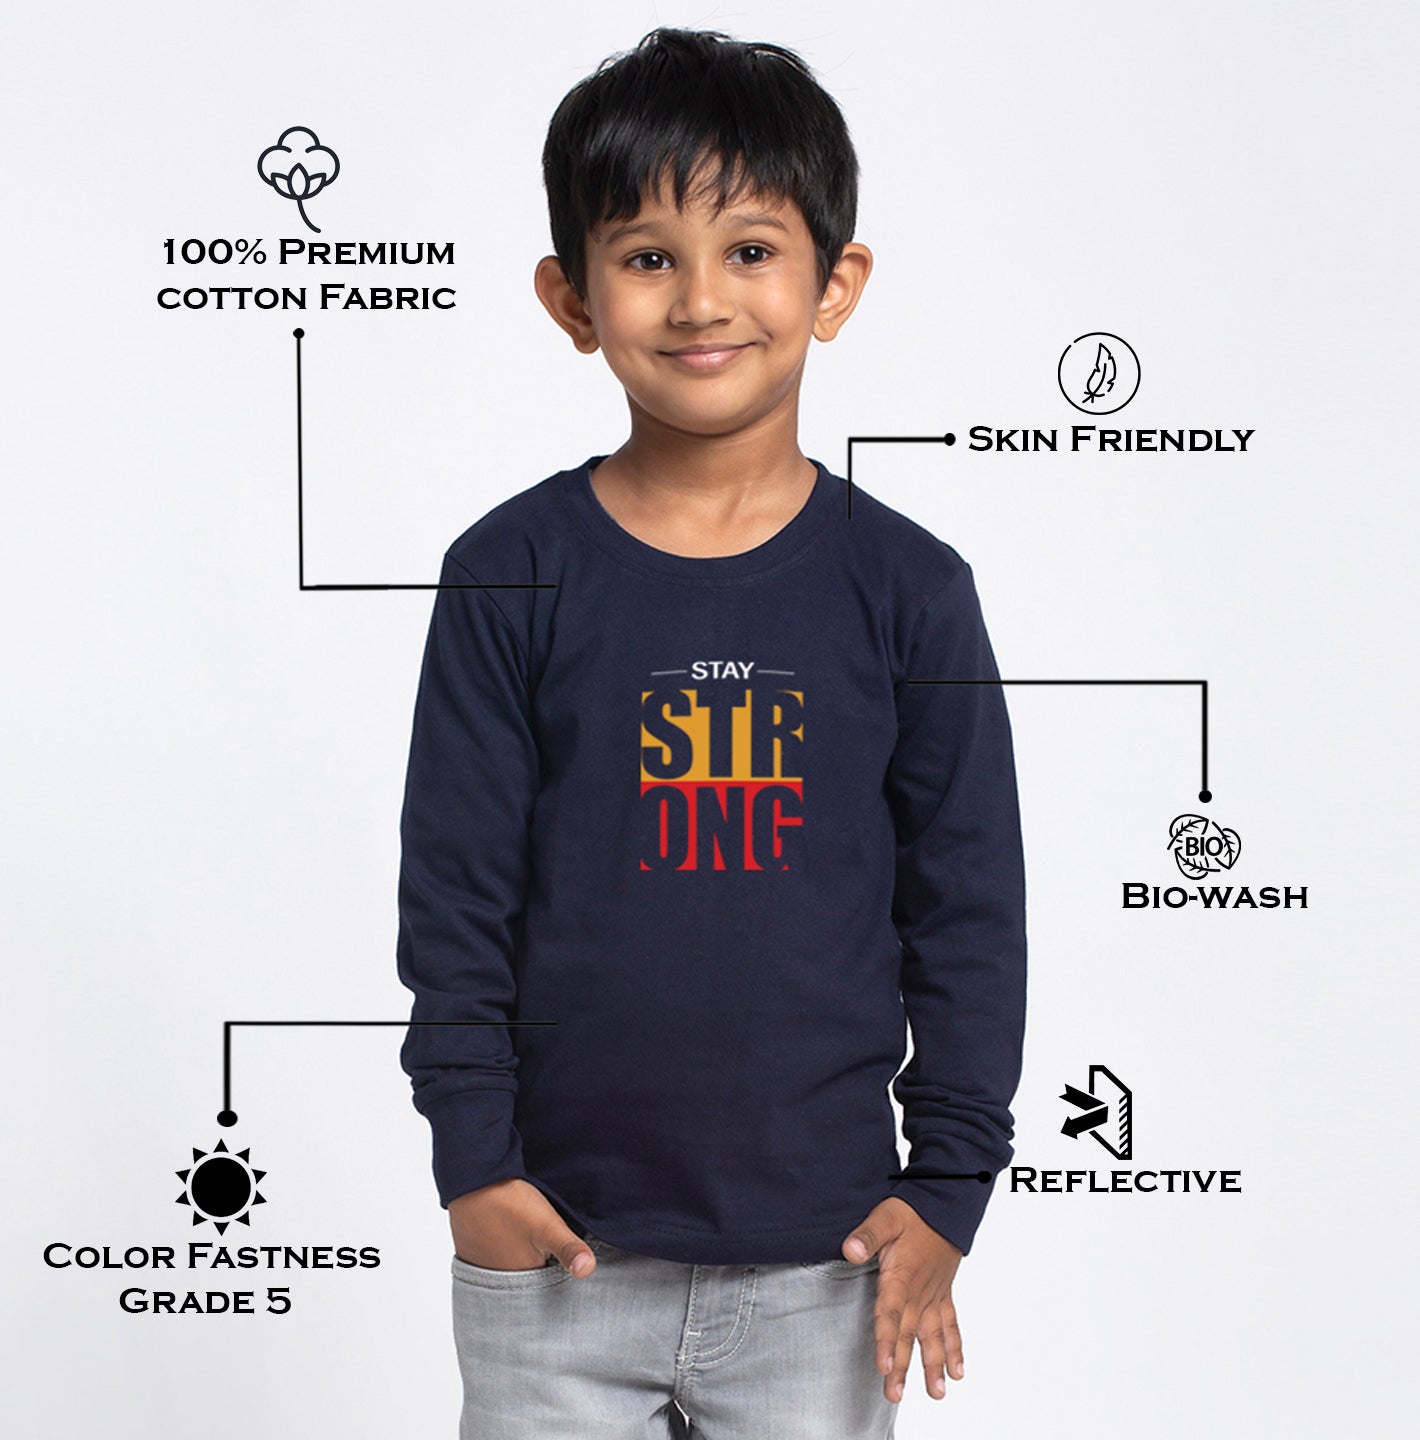 Kids Strong printed full sleeves t-shirt - Friskers